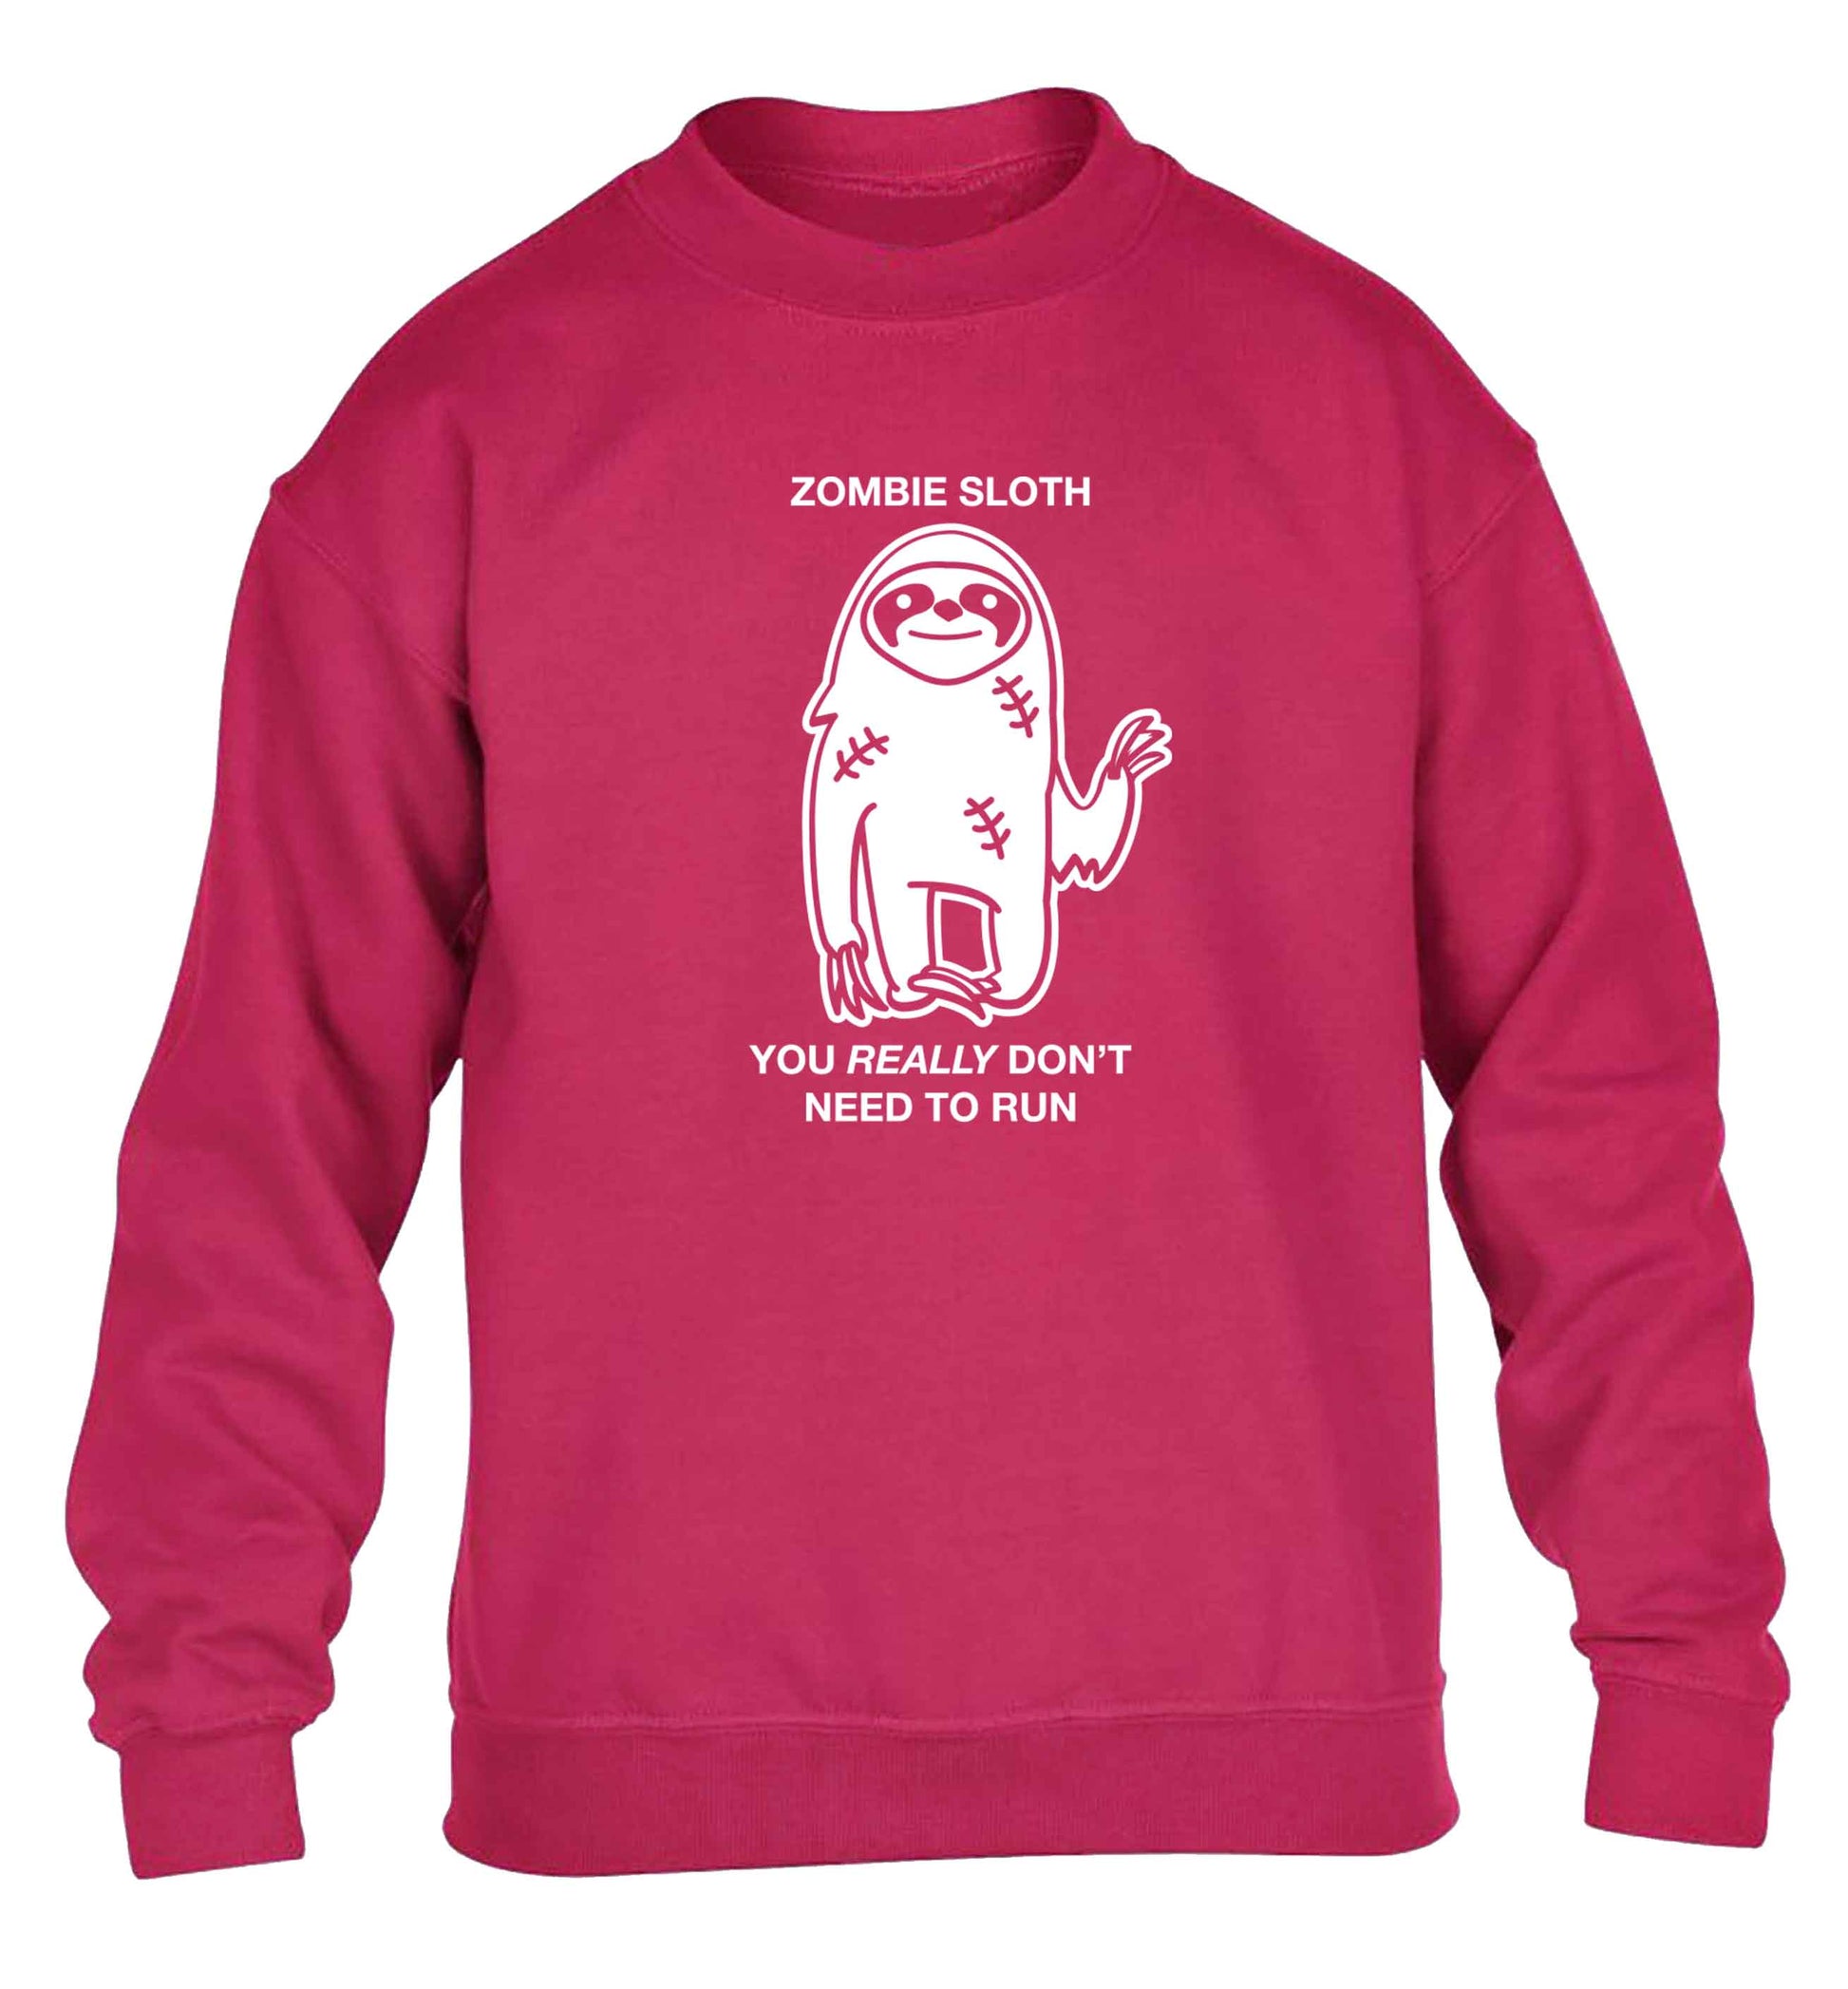 Zombie sloth you really don't need to run children's pink sweater 12-13 Years